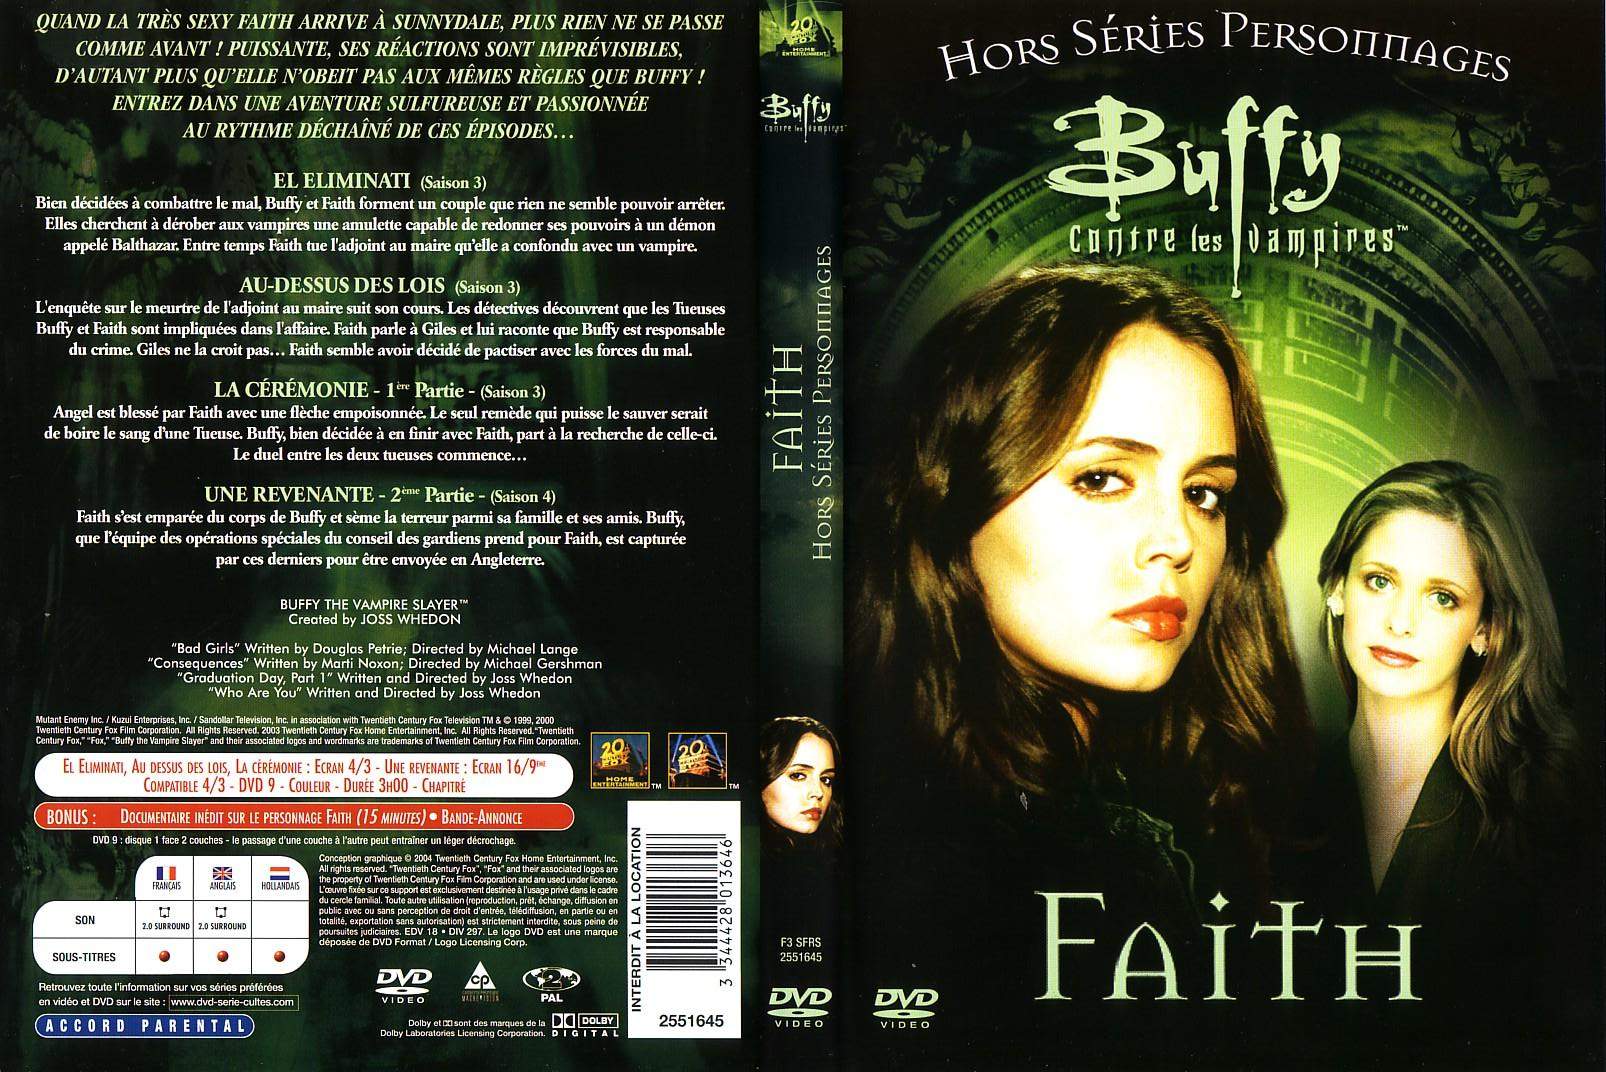 Jaquette DVD Buffy Hors sries personnages - Faith